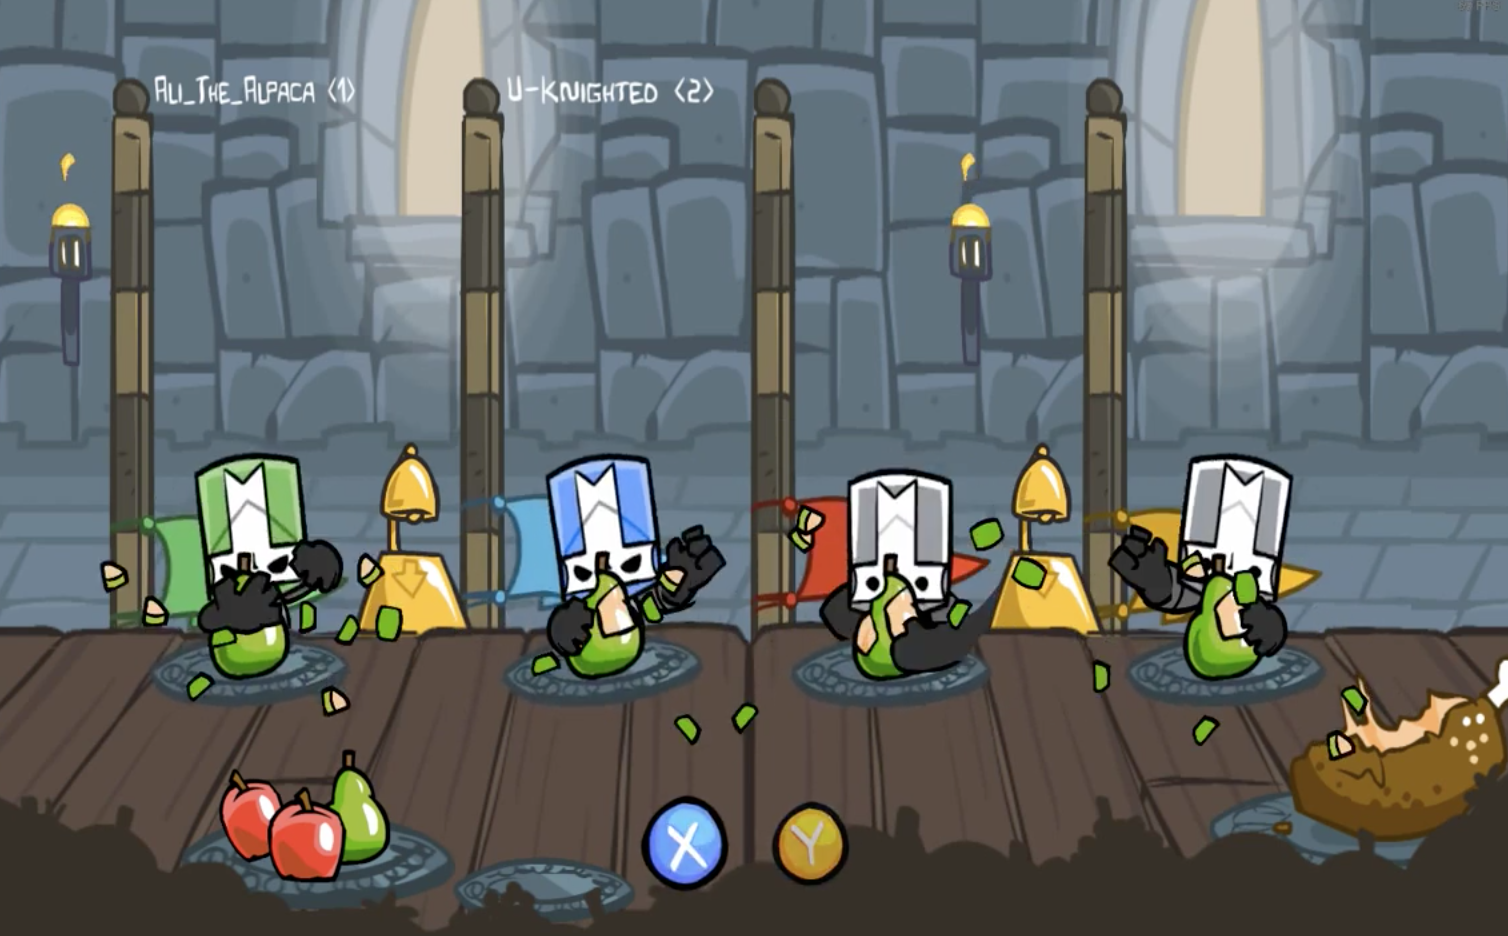 how to install castle crashers file mods (steam) 